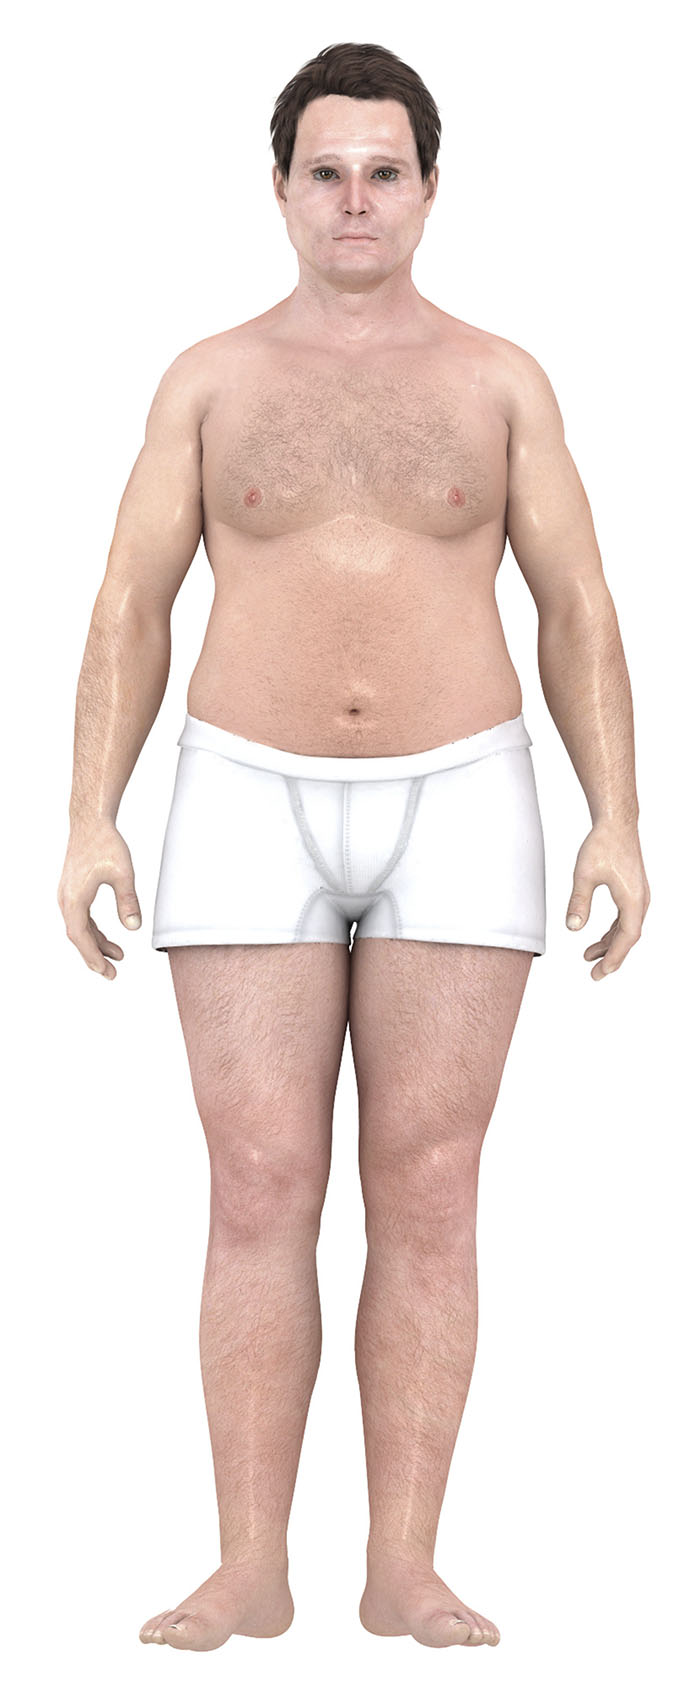 This Is How Male Body Ideals Have Changed Over Time